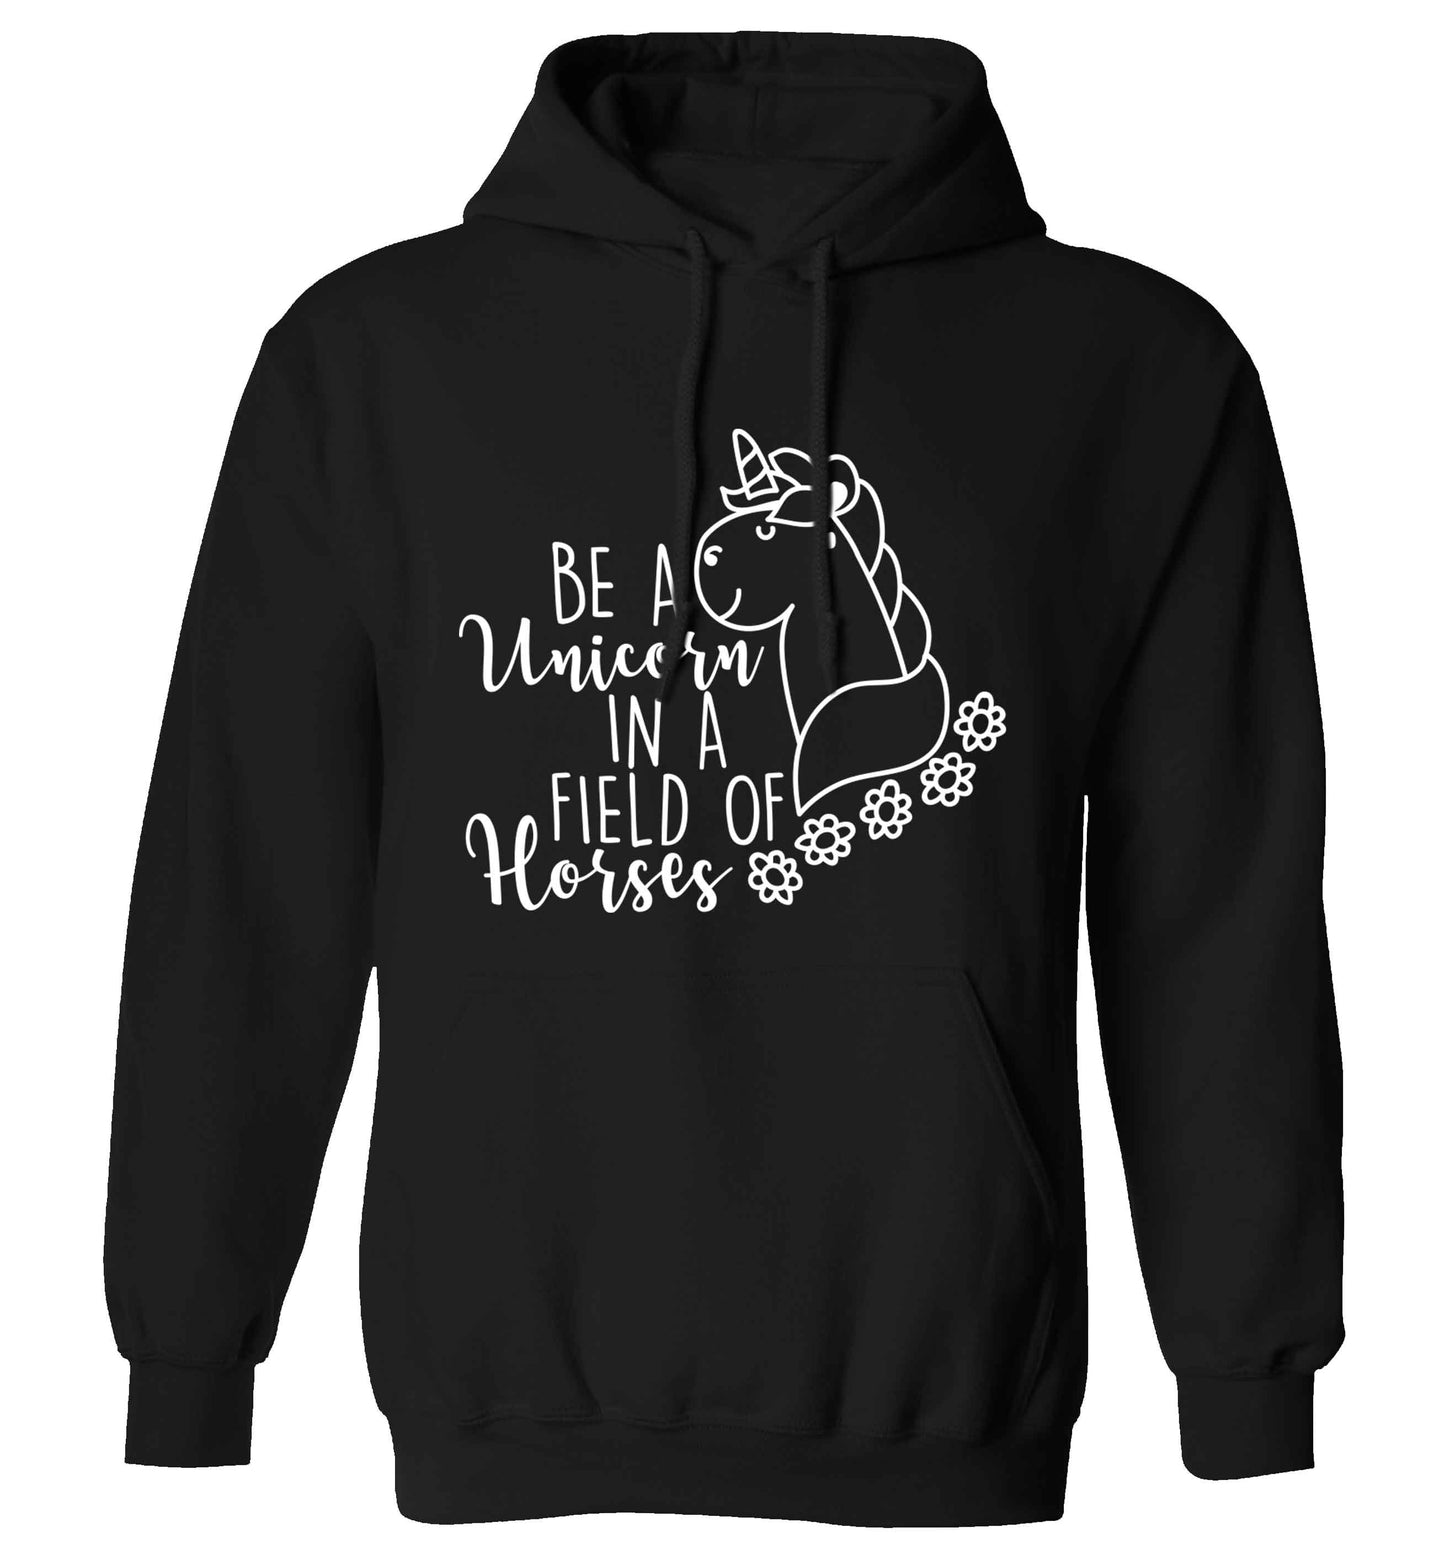 Be a unicorn in a field of horses adults unisex black hoodie 2XL